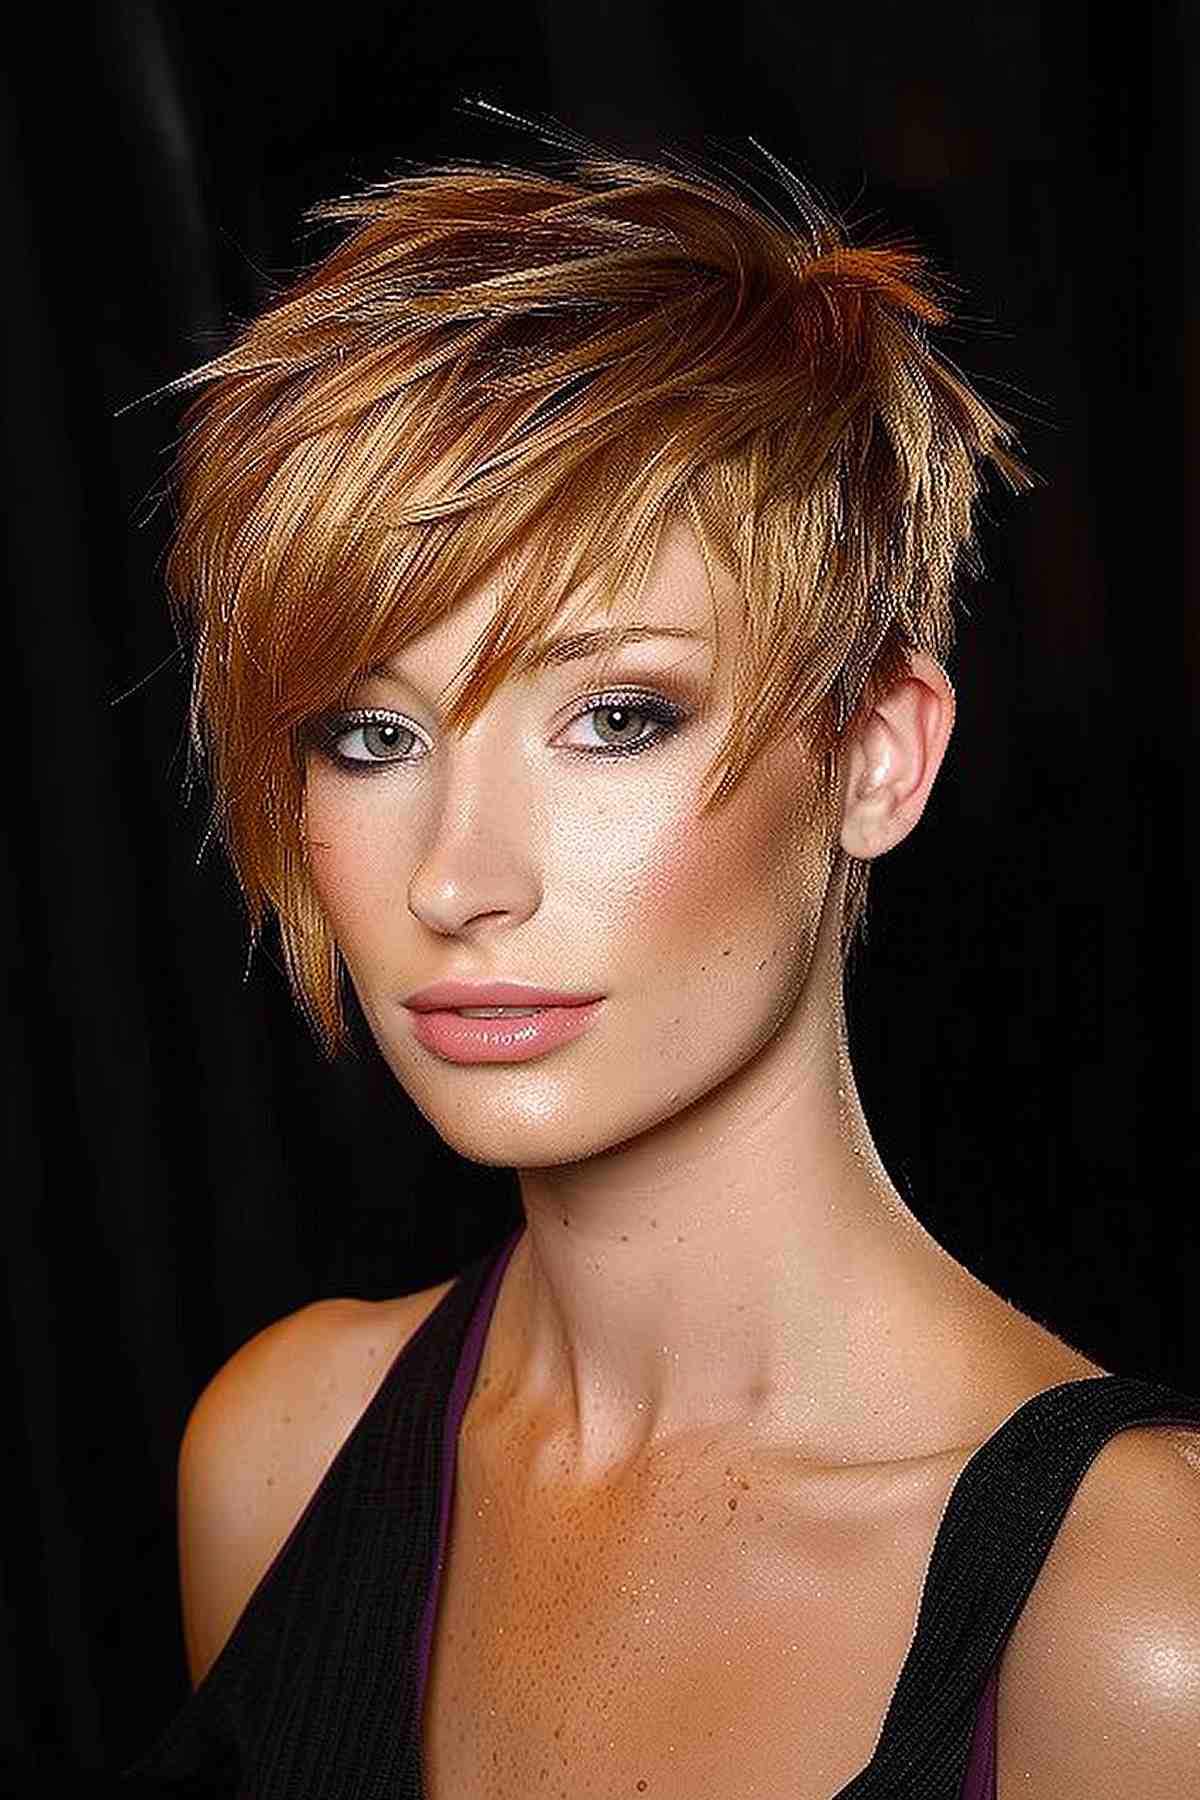 Asymmetrical elf crop haircut with vibrant copper color and longer layers on one side.